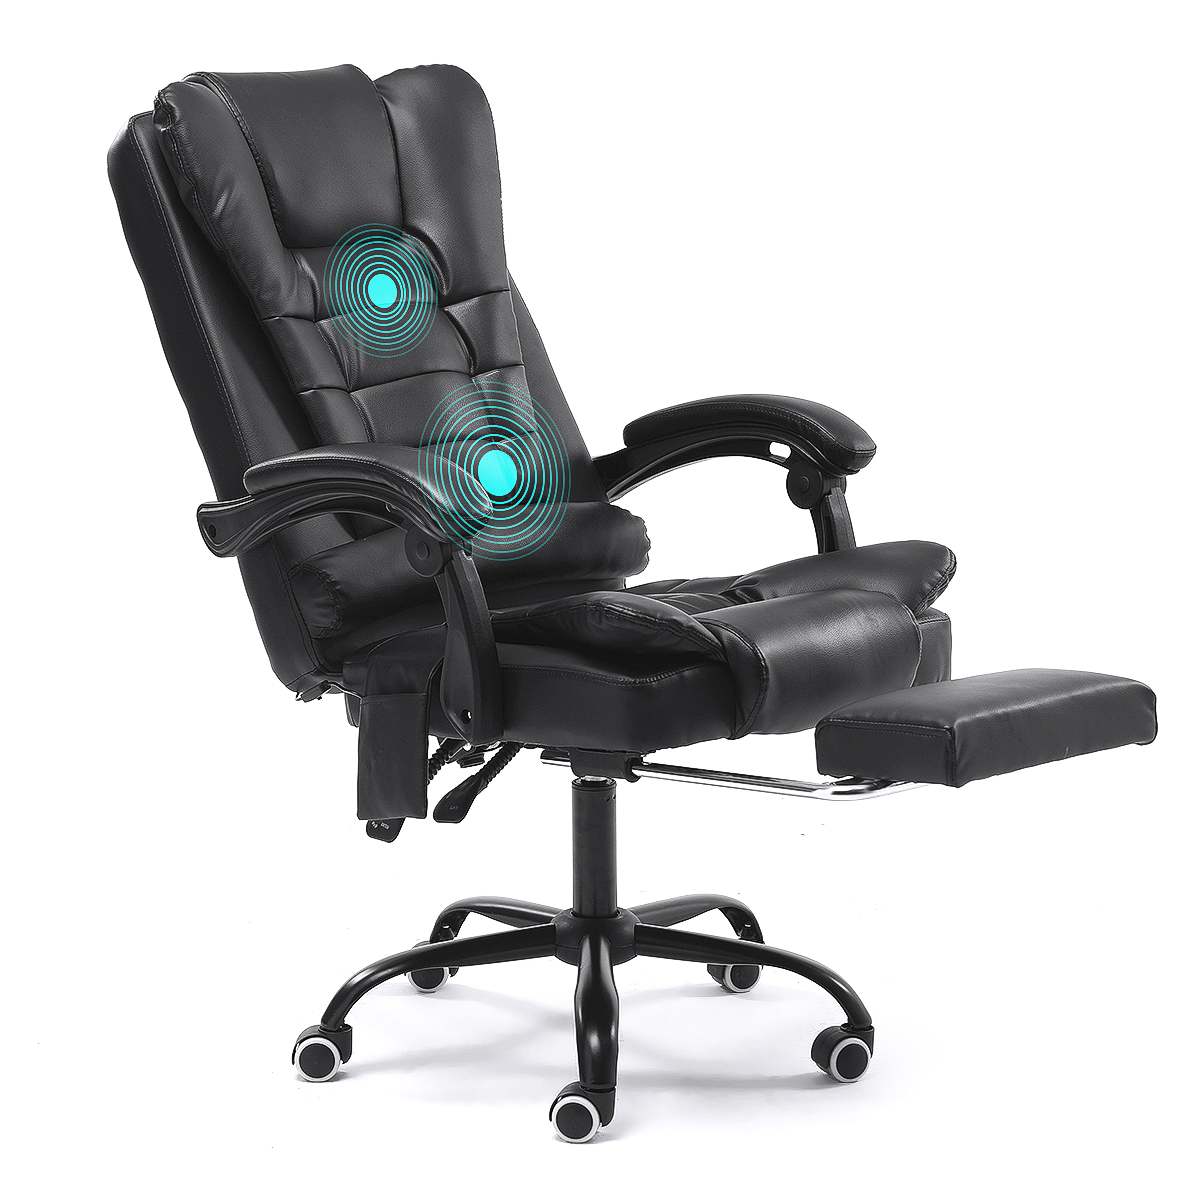 7 Point Massage Boss Chair Computer Office Chair Home Swivel Massage Chair Lifting Adjustable Chair 0.8mm PVC with Footrest